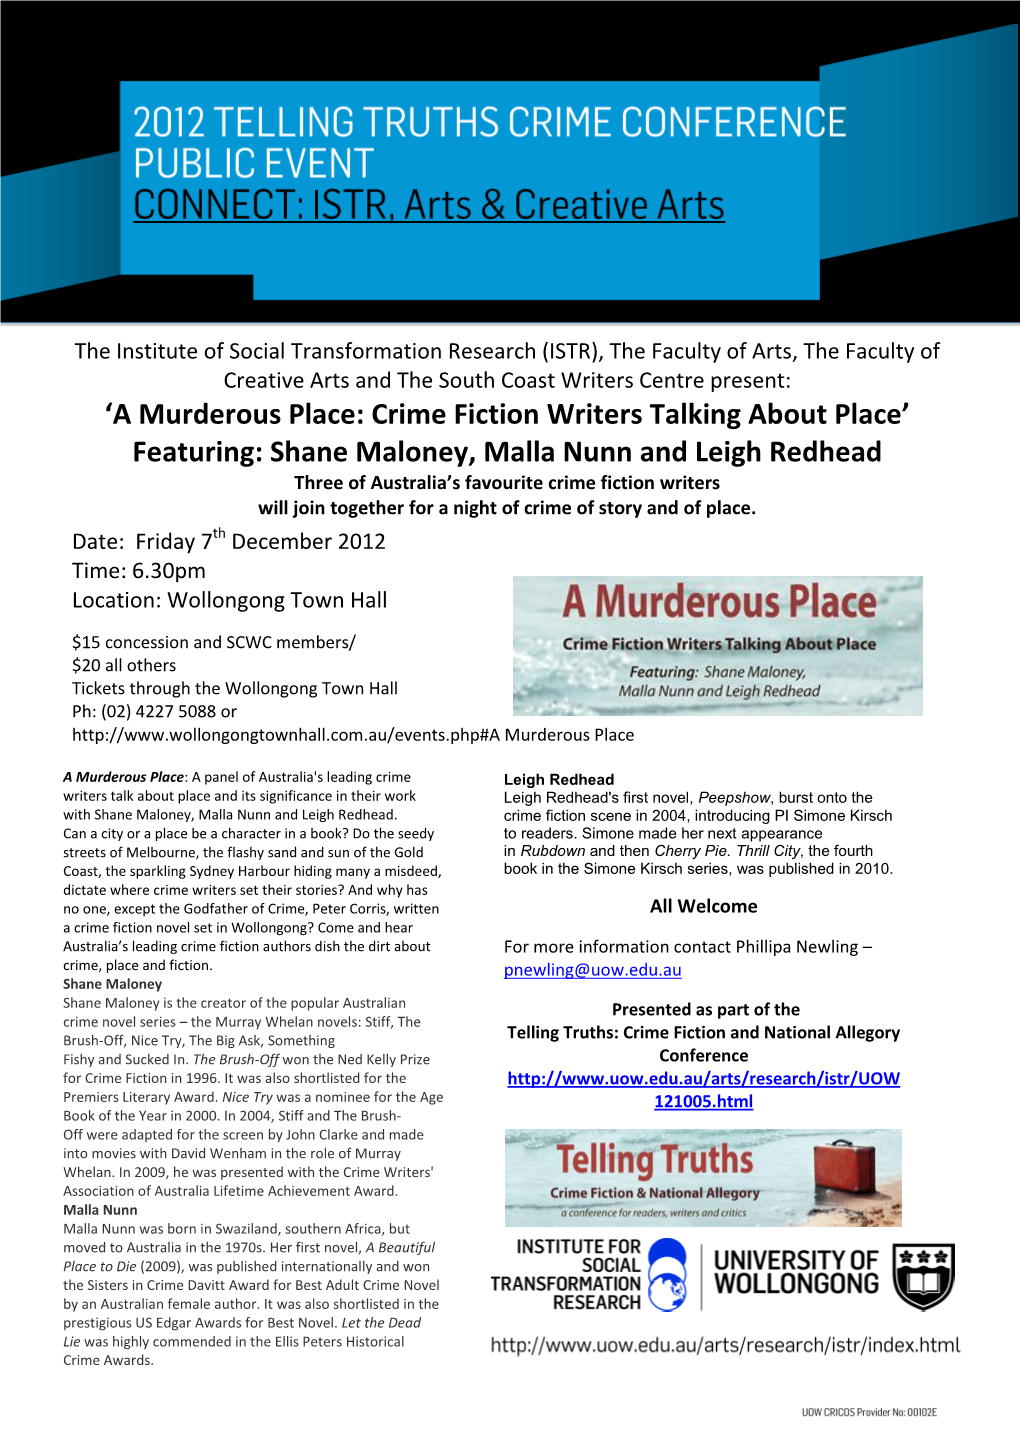 Shane Maloney, Malla Nunn and Leigh Redhead Three of Australia’S Favourite Crime Fiction Writers Will Join Together for a Night of Crime of Story and of Place